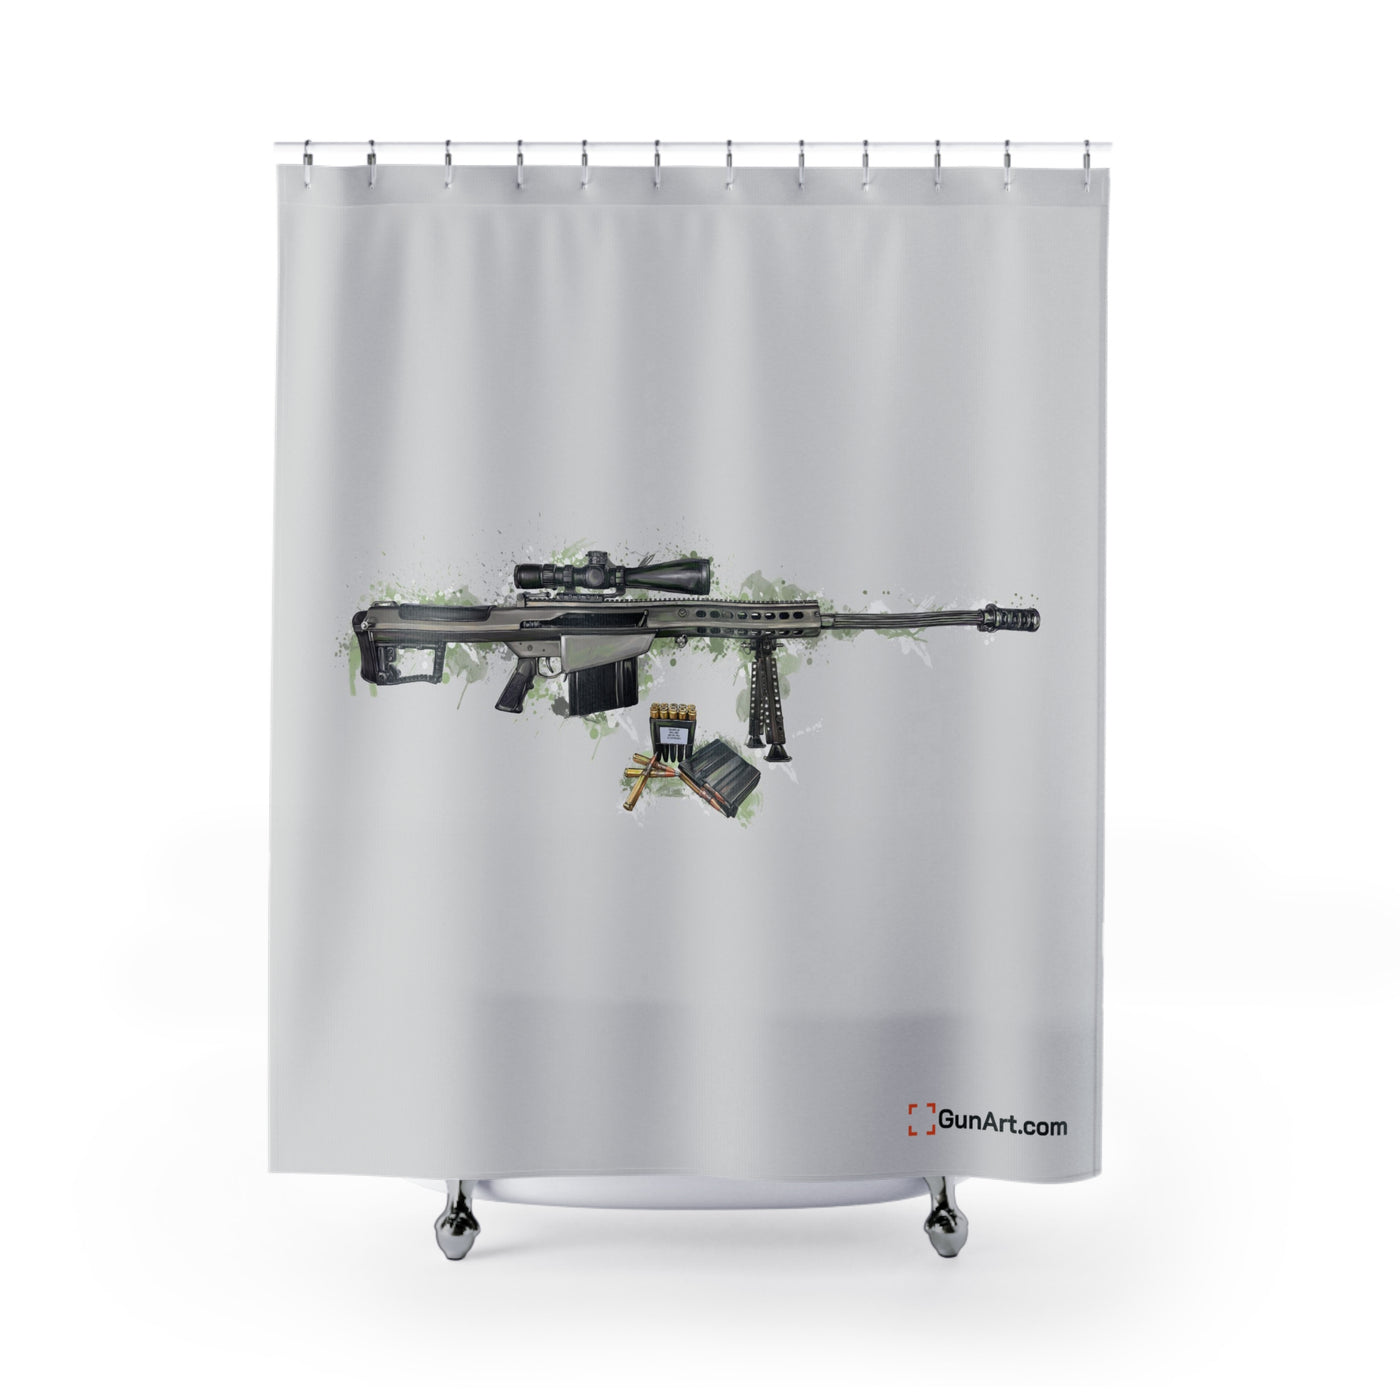 The Long-Range Legend - .50 Cal BMG Rifle Shower Curtain - Green Background